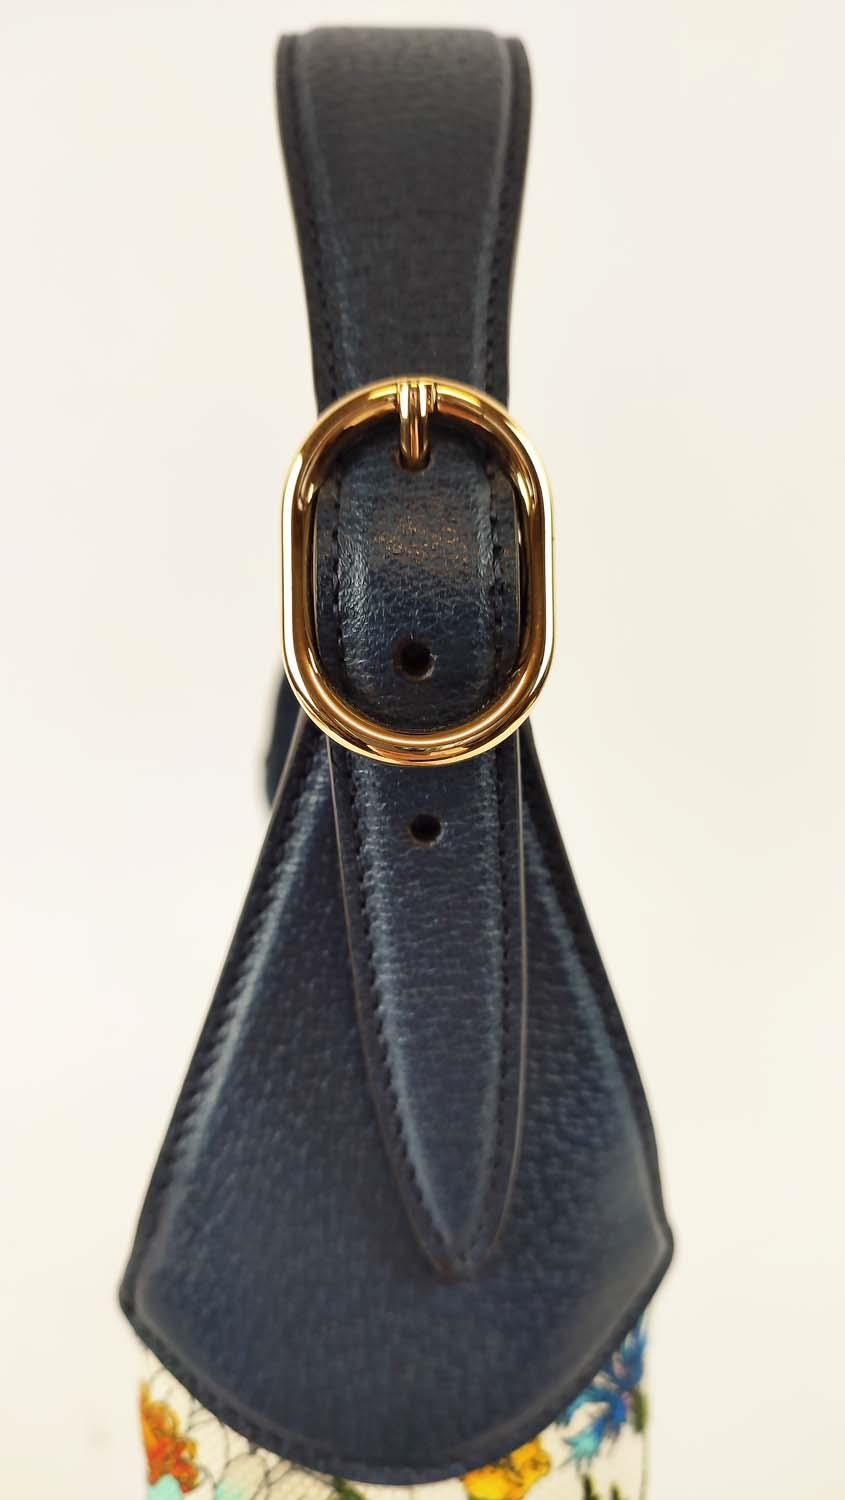 GUCCI JACKIE FLORA HOBO BAG, fabric floral pattern by Vittorio Accornero and navy blue leather - Image 6 of 8